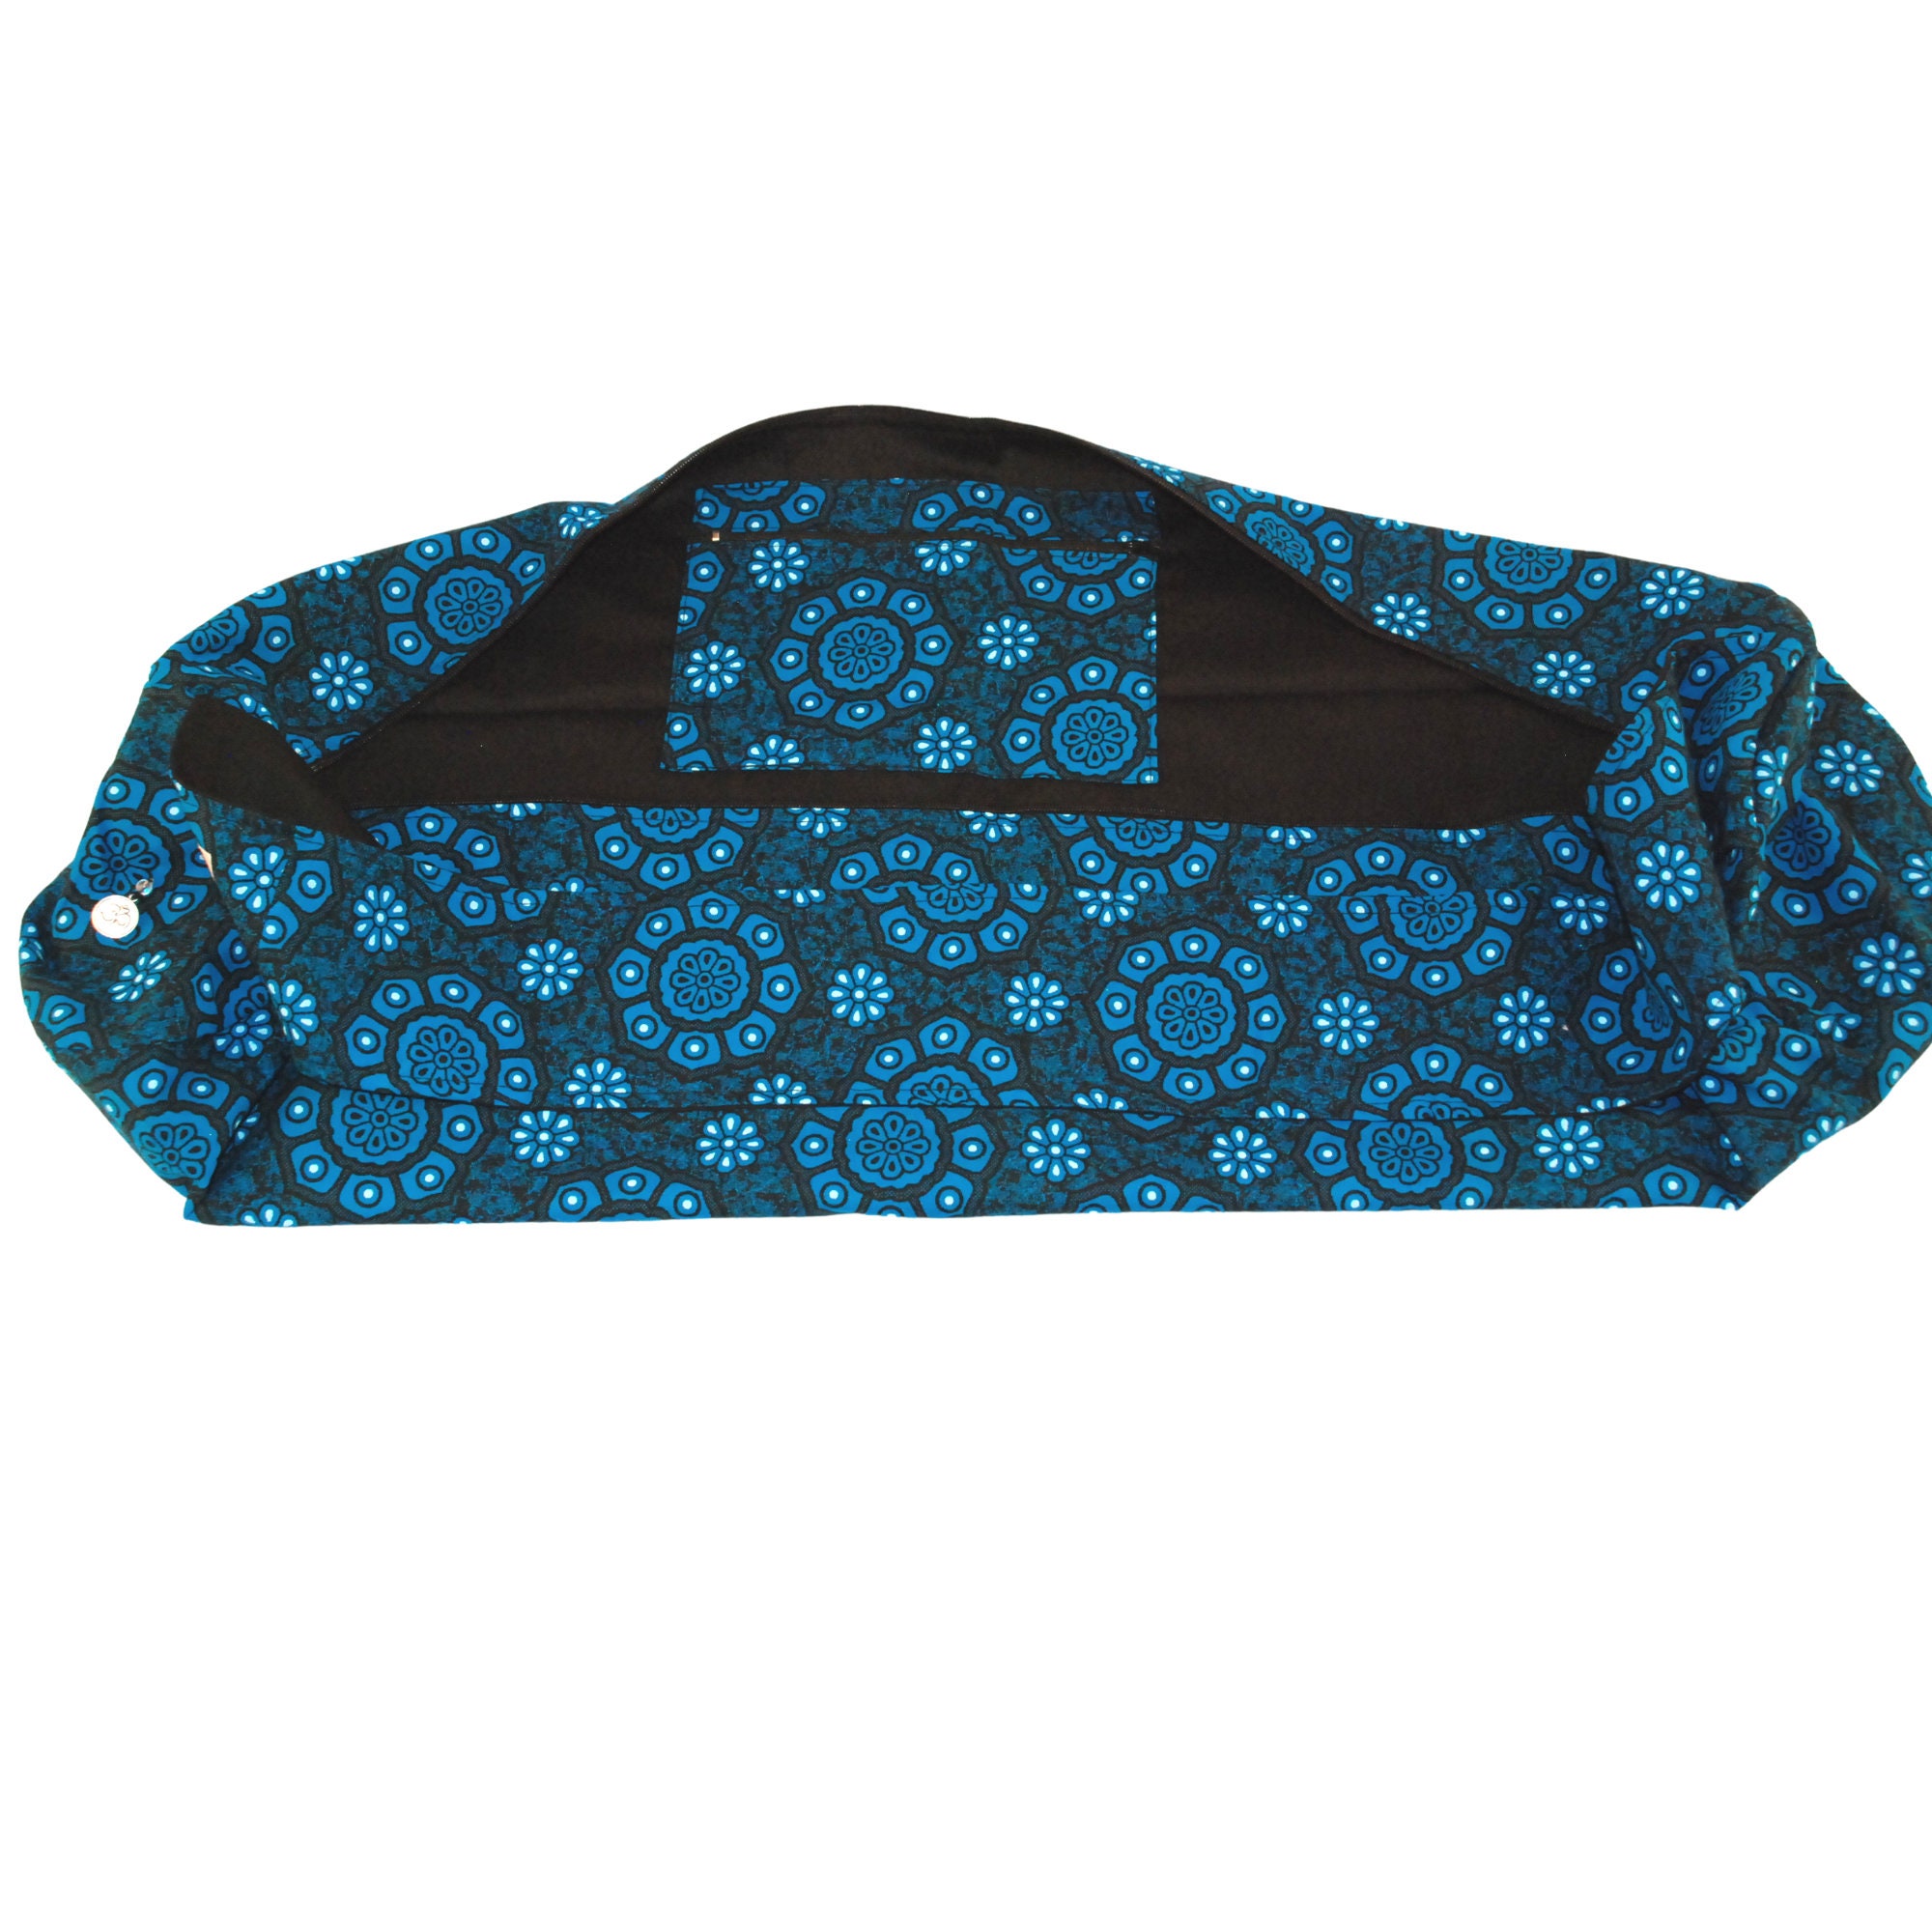 wismi Yoga mat Carrier Bag Patterned Canvas with Pocket and Full-Zip 